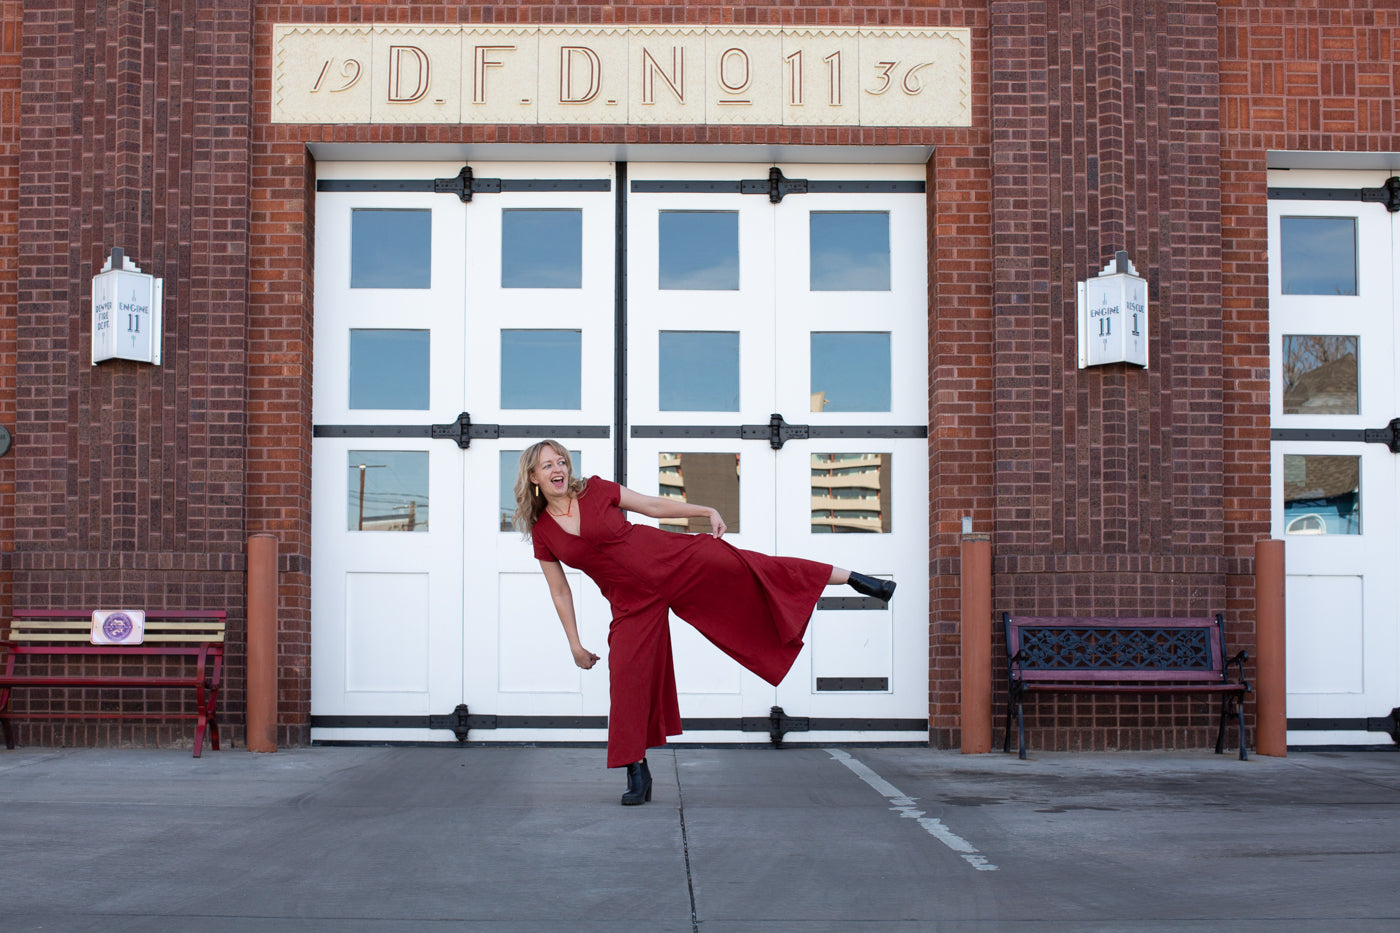 Amber wearing a red raw silk noil romper doing a high kick in front of a brick firehouse with white doors.